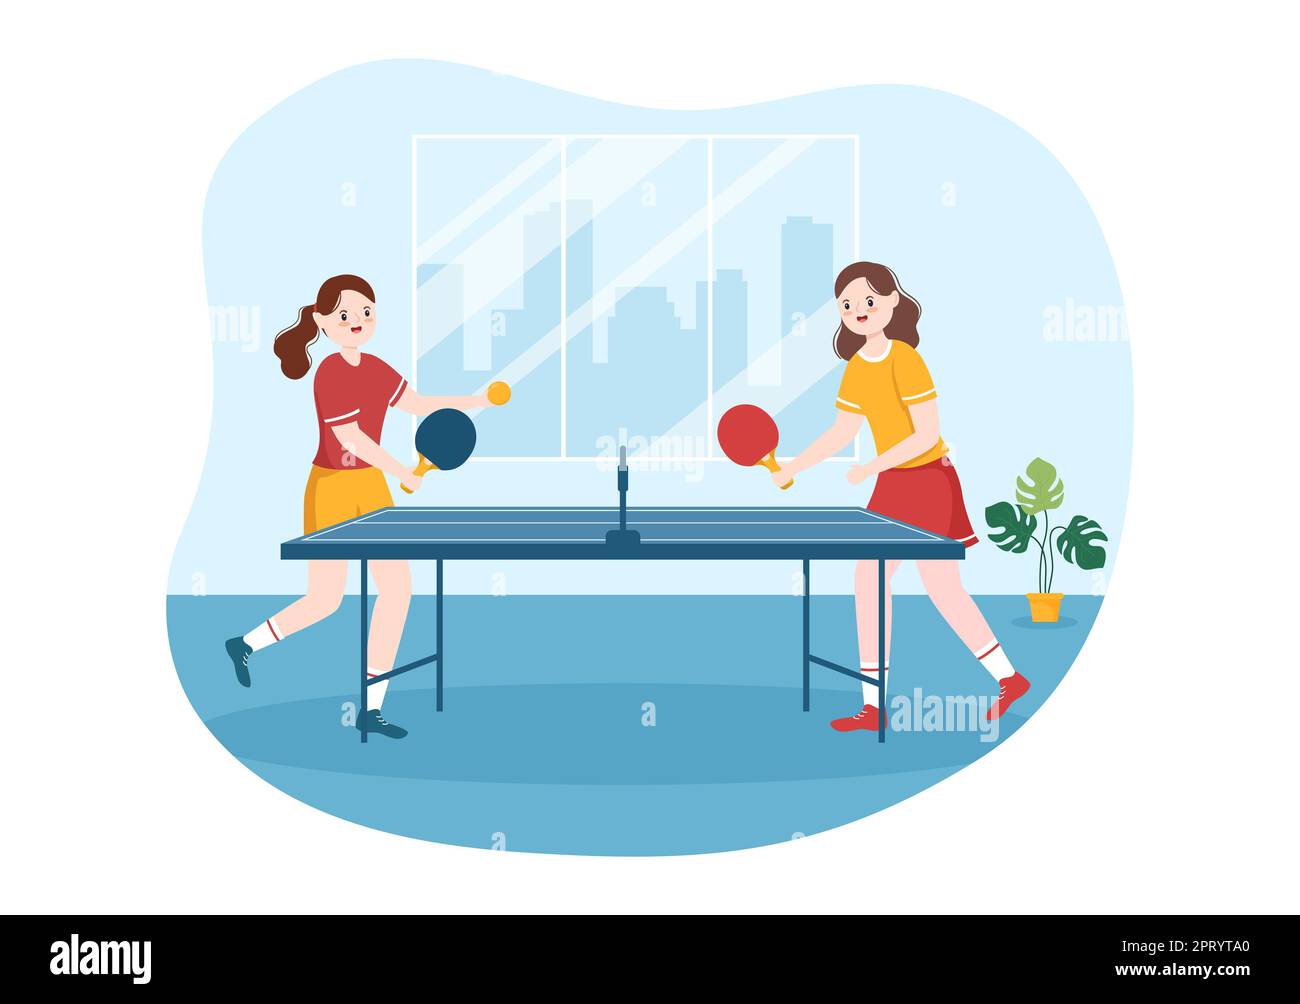 People Playing Table Tennis Sports with Racket and Ball of Ping Pong Game  Match in Flat Cartoon Hand Drawn Templates Illustration Stock Photo - Alamy